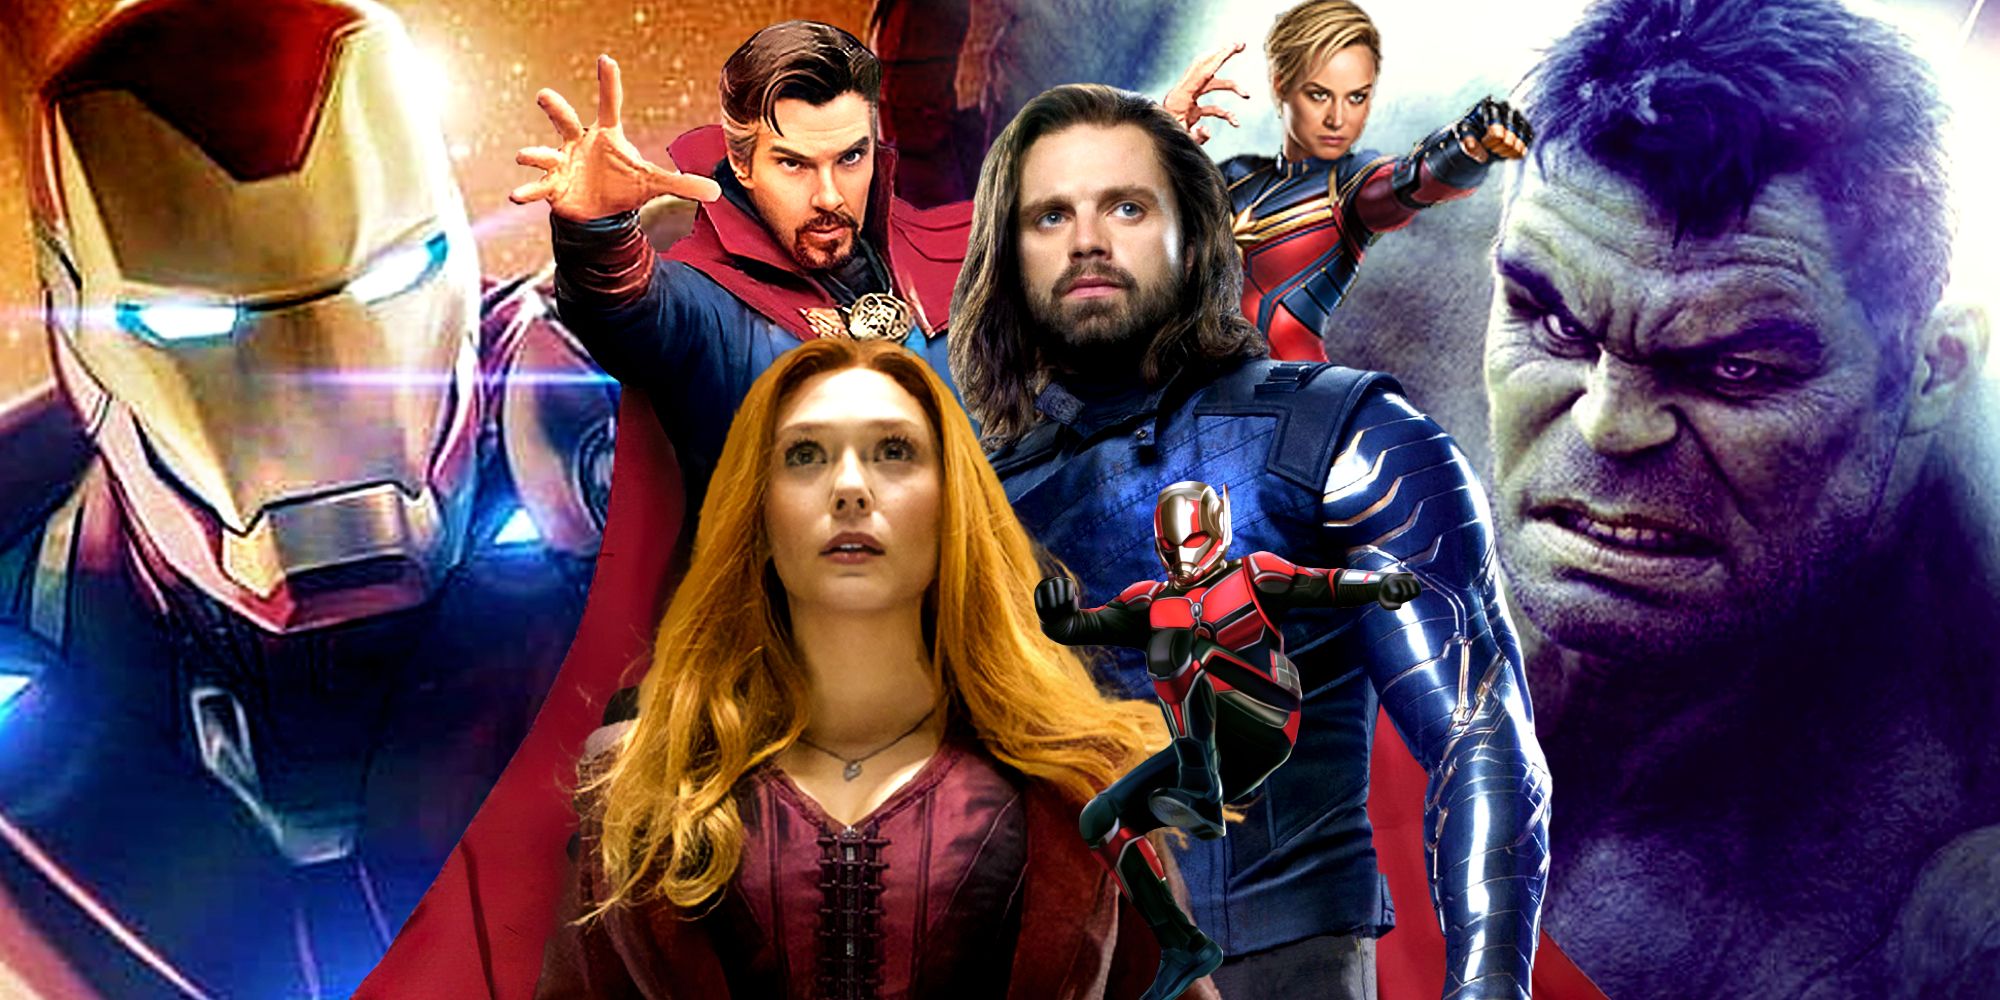 Marvel Avengers Scarlet Witch, Doctor Strange, Ant-Man, and Bucky Barnes Assemble with Iron Man and Hulk in the MCU